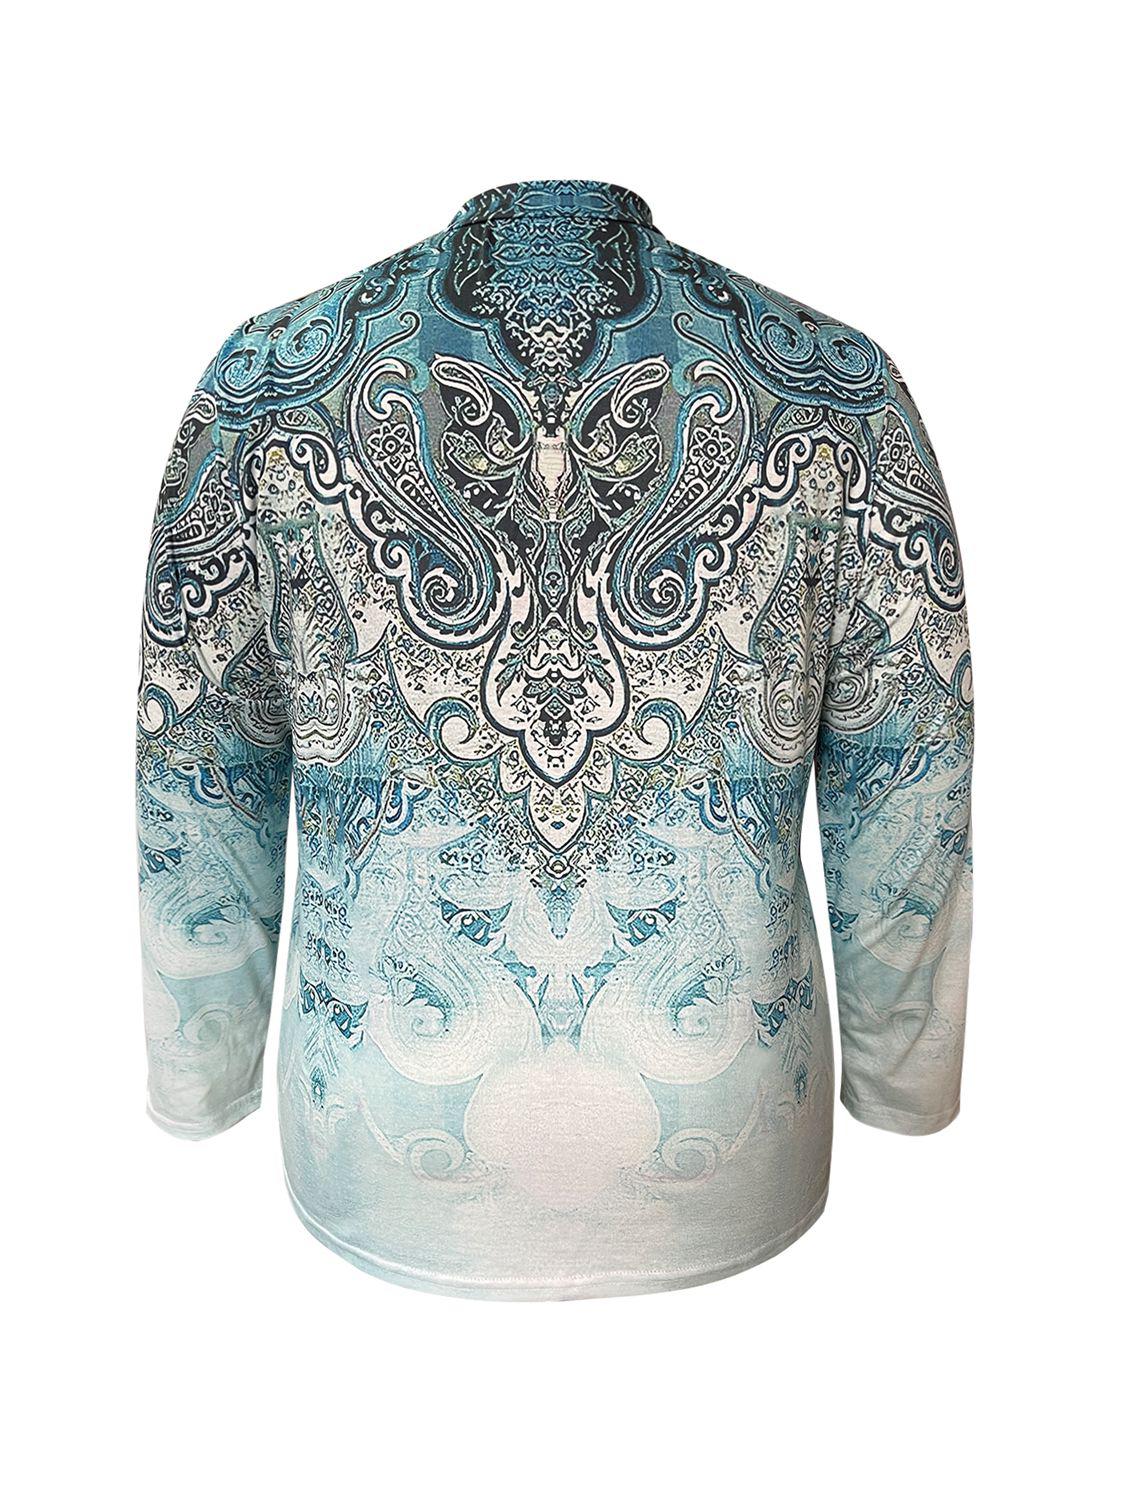 Plus Size Printed Button-Up Long Sleeve T-Shirt BLUE ZONE PLANET